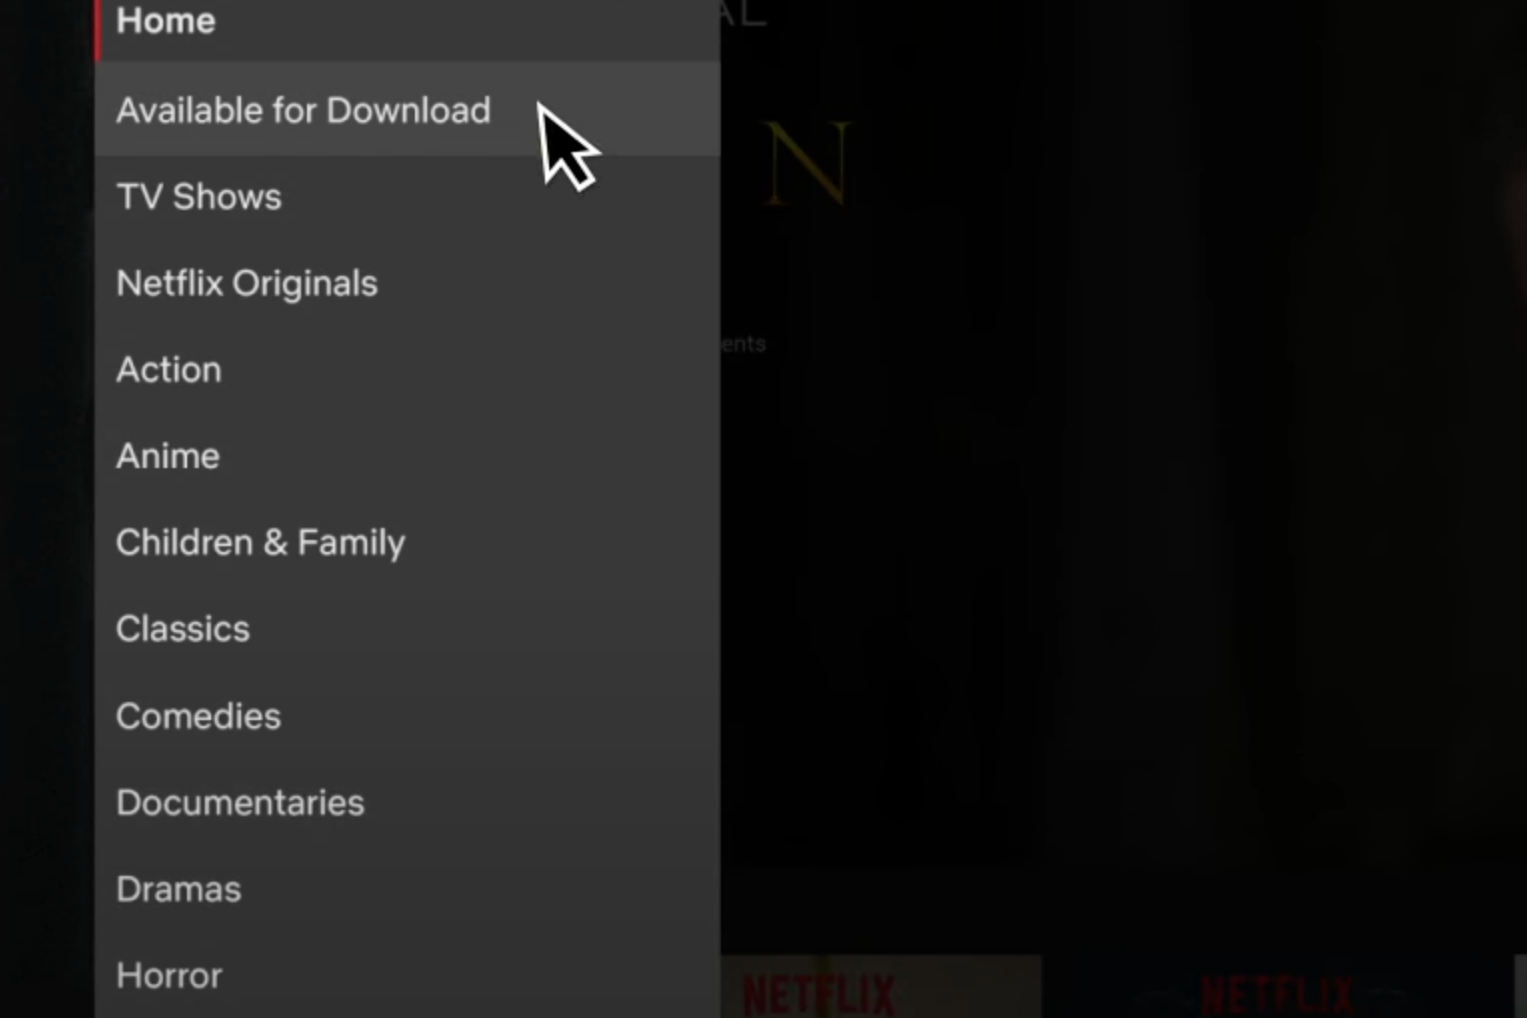 Netflix Available for download button